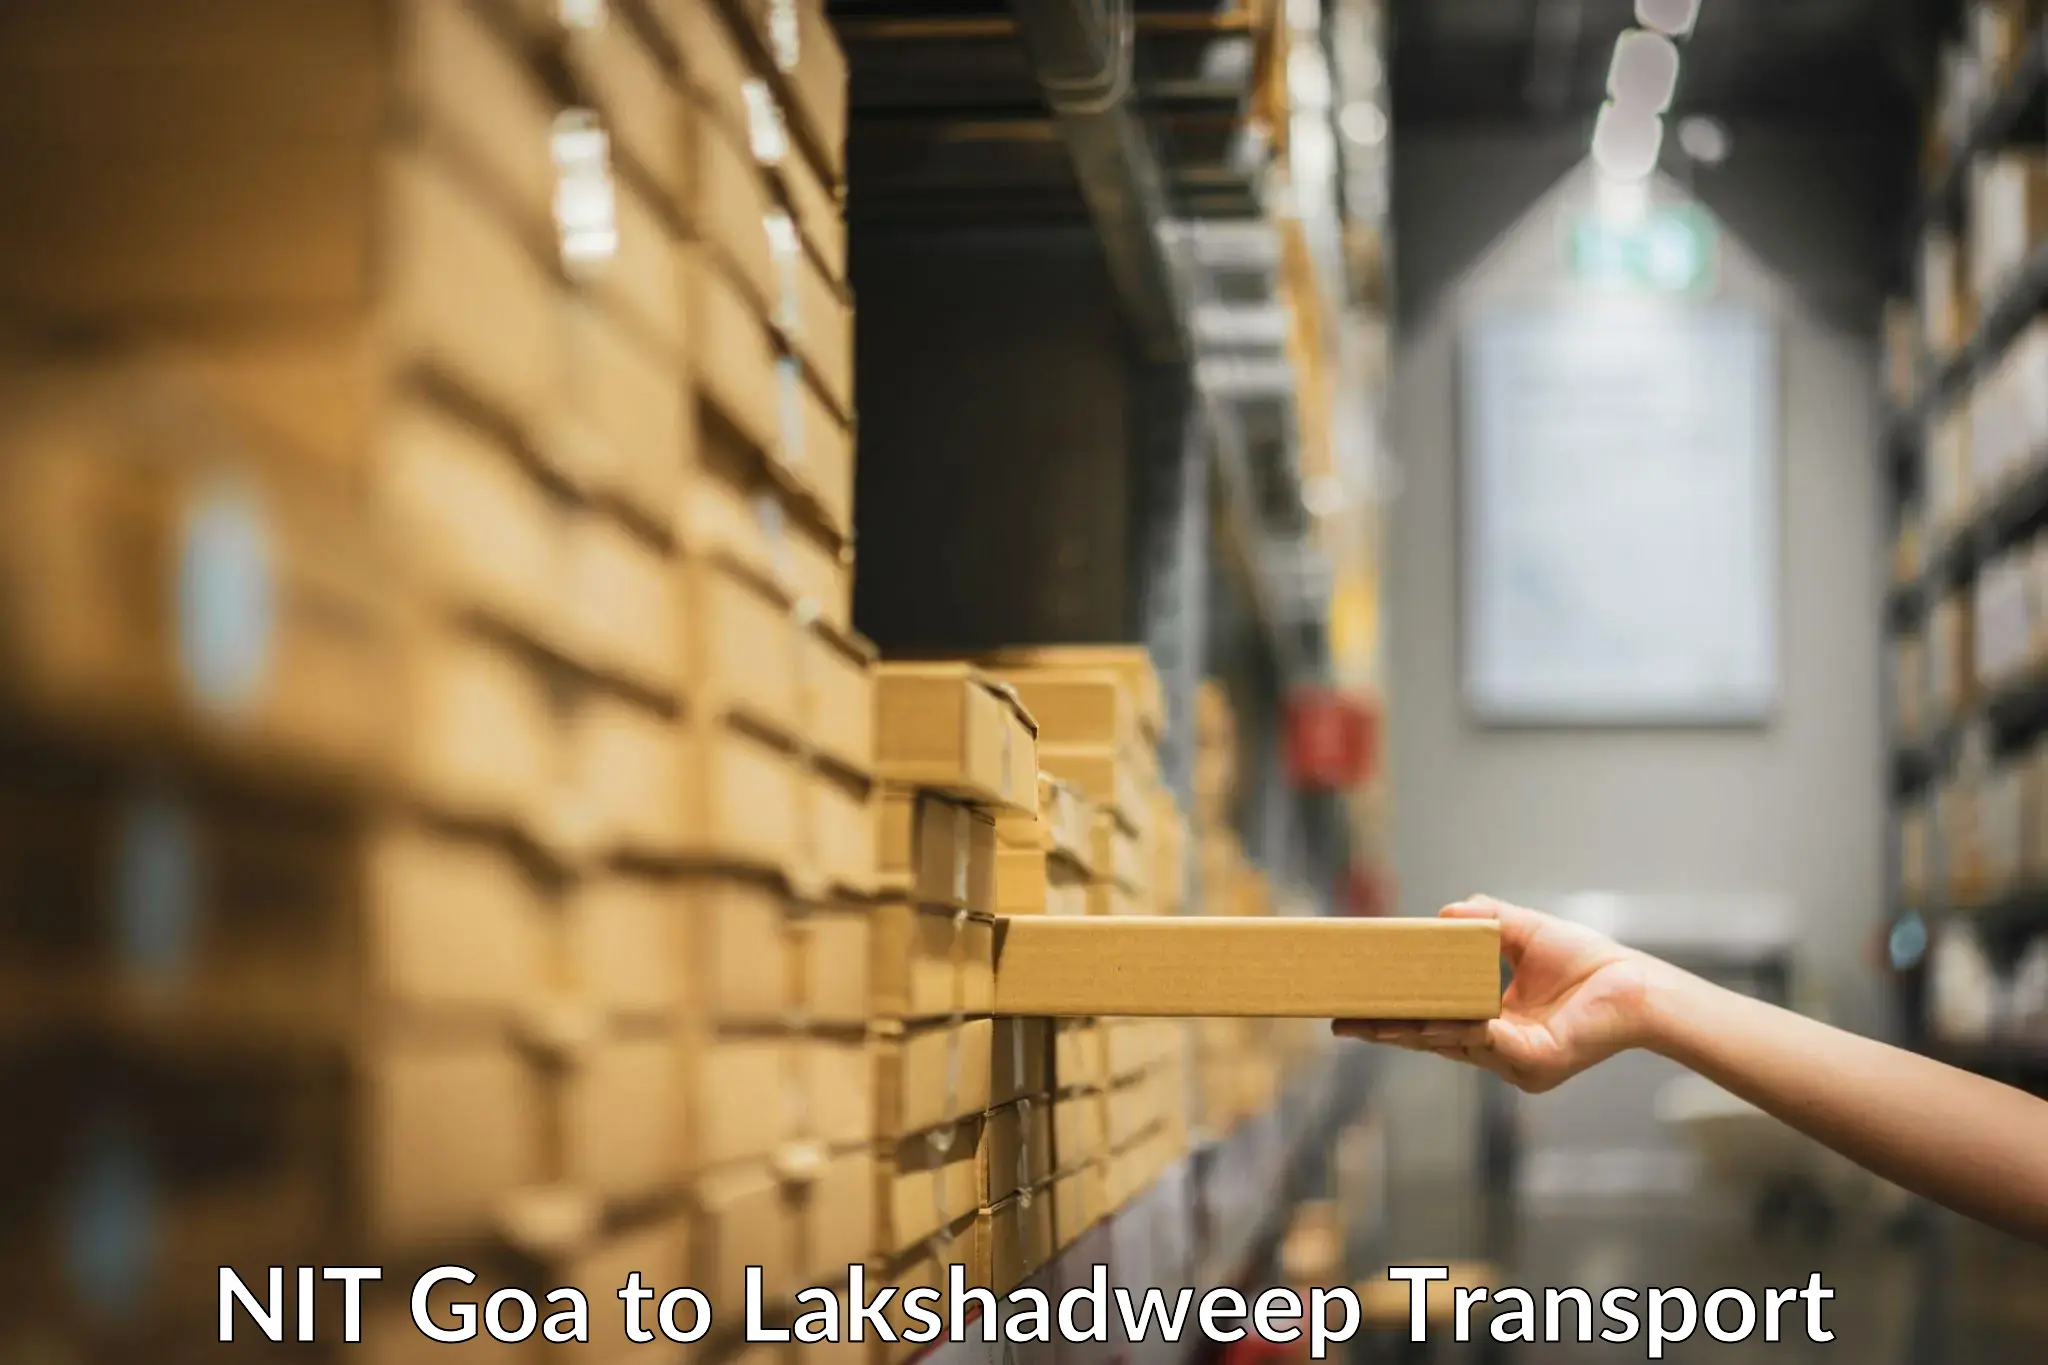 Online transport in NIT Goa to Lakshadweep